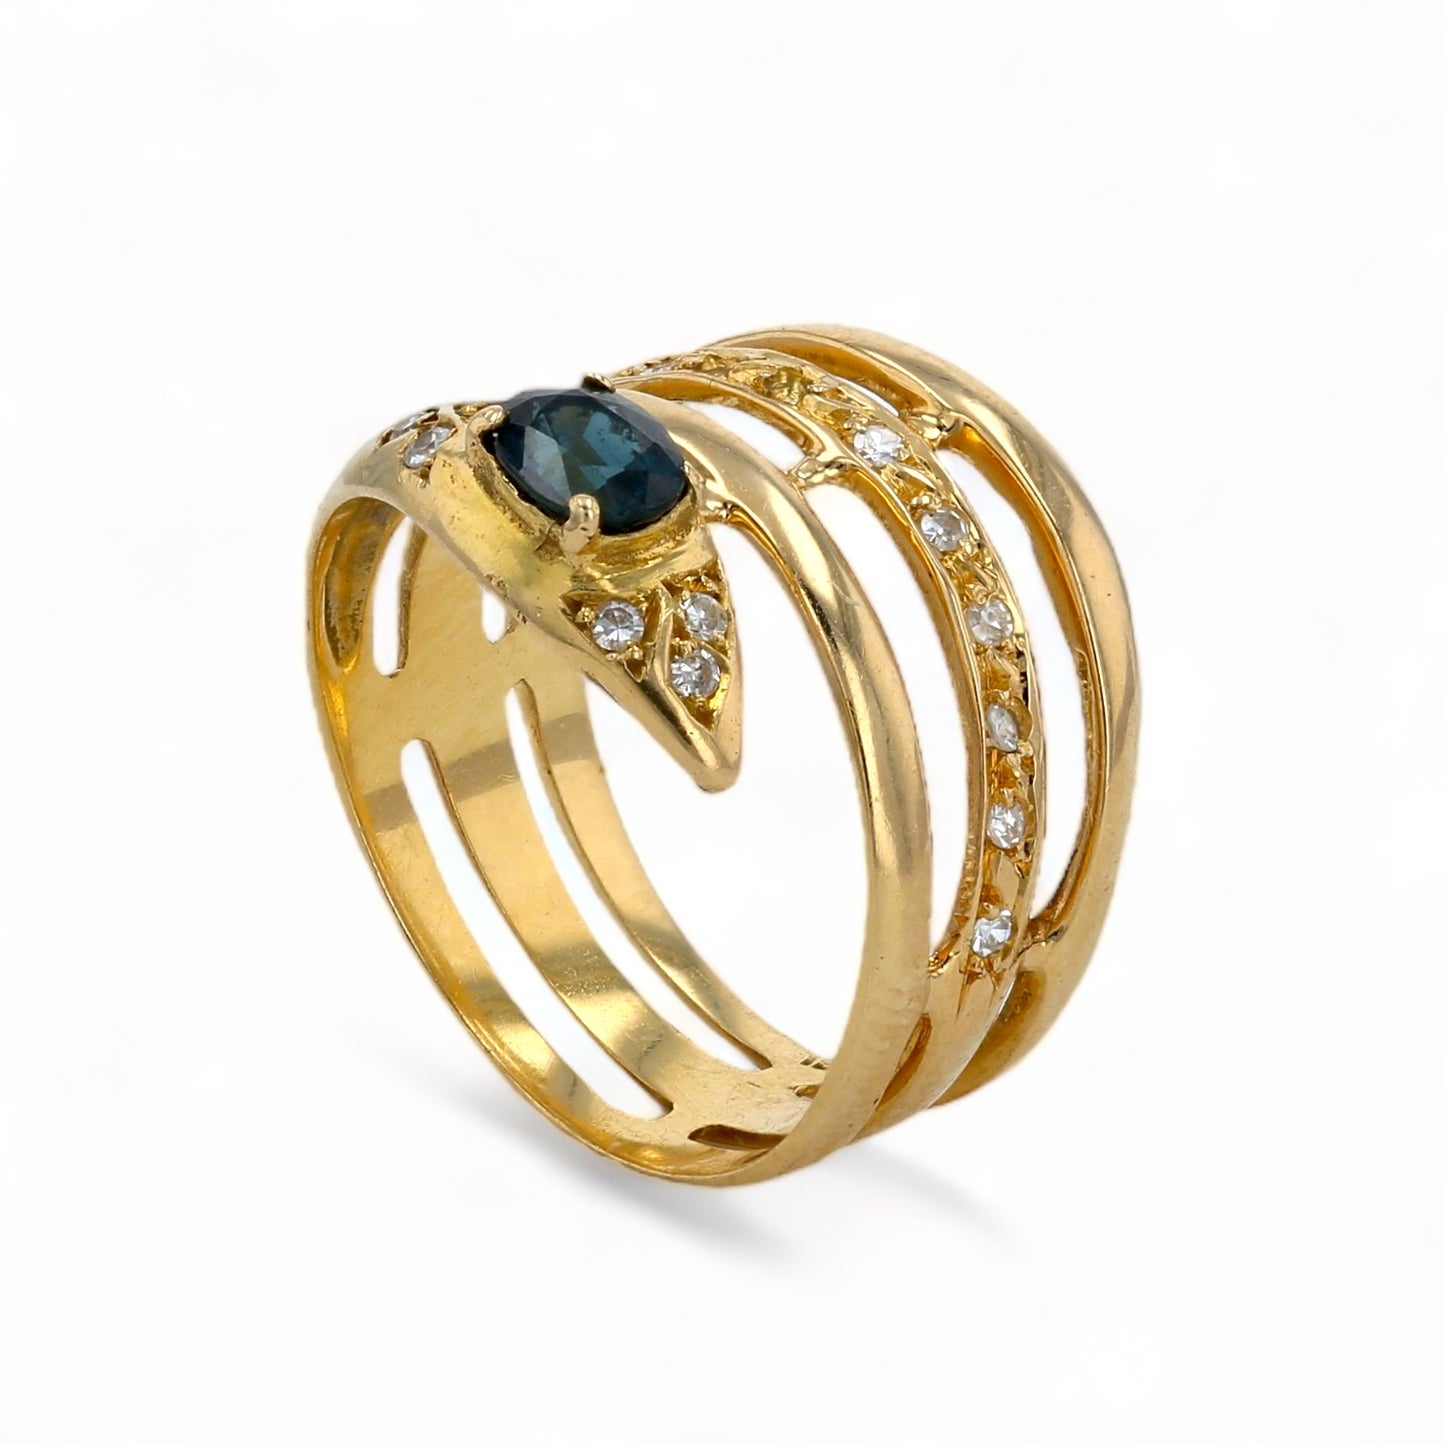 18k yellow gold diamond and blue sapphire snake ring-5389